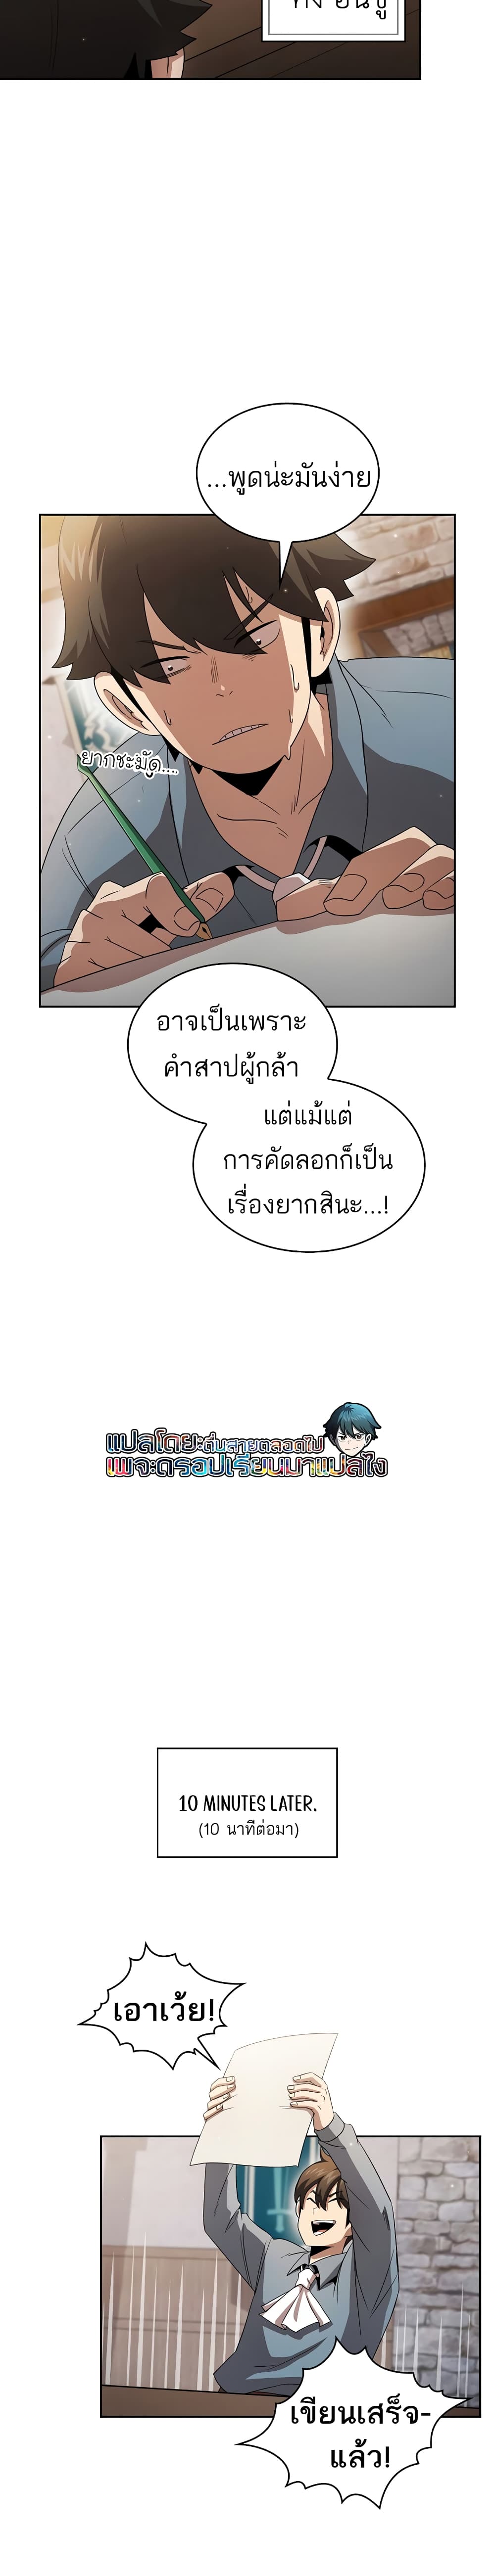 Is This Hero for Real à¸à¸­à¸à¸à¸µà¹ 31 (20)